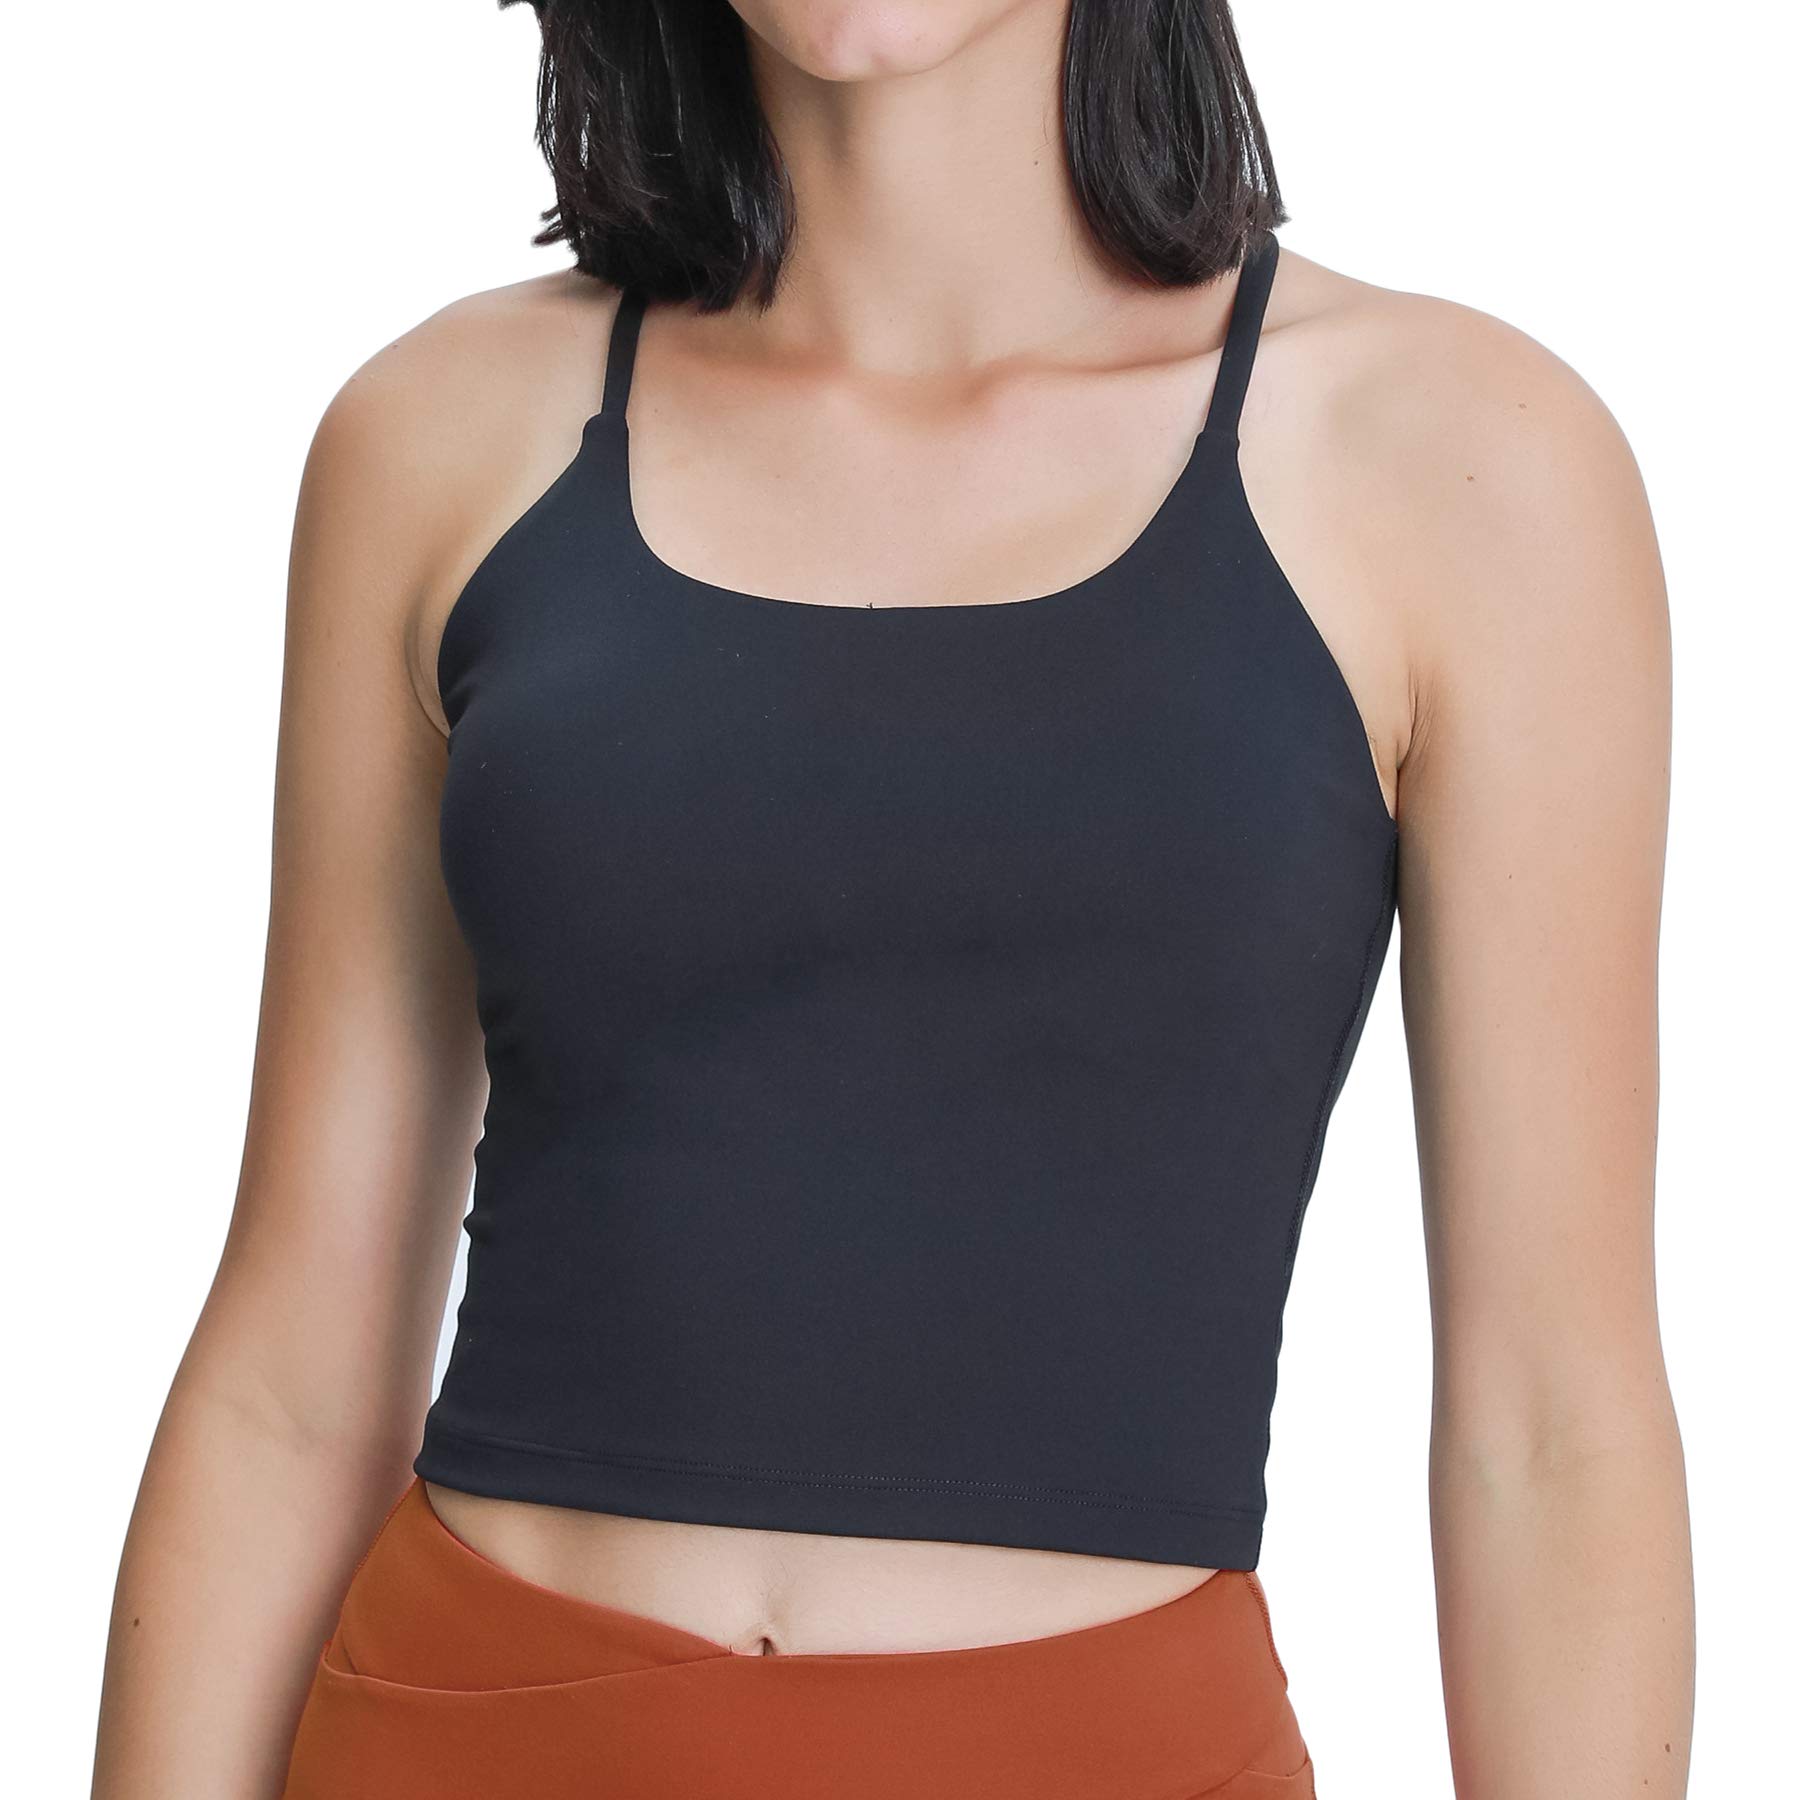 Yoga Strappy Back Tank Top for Women